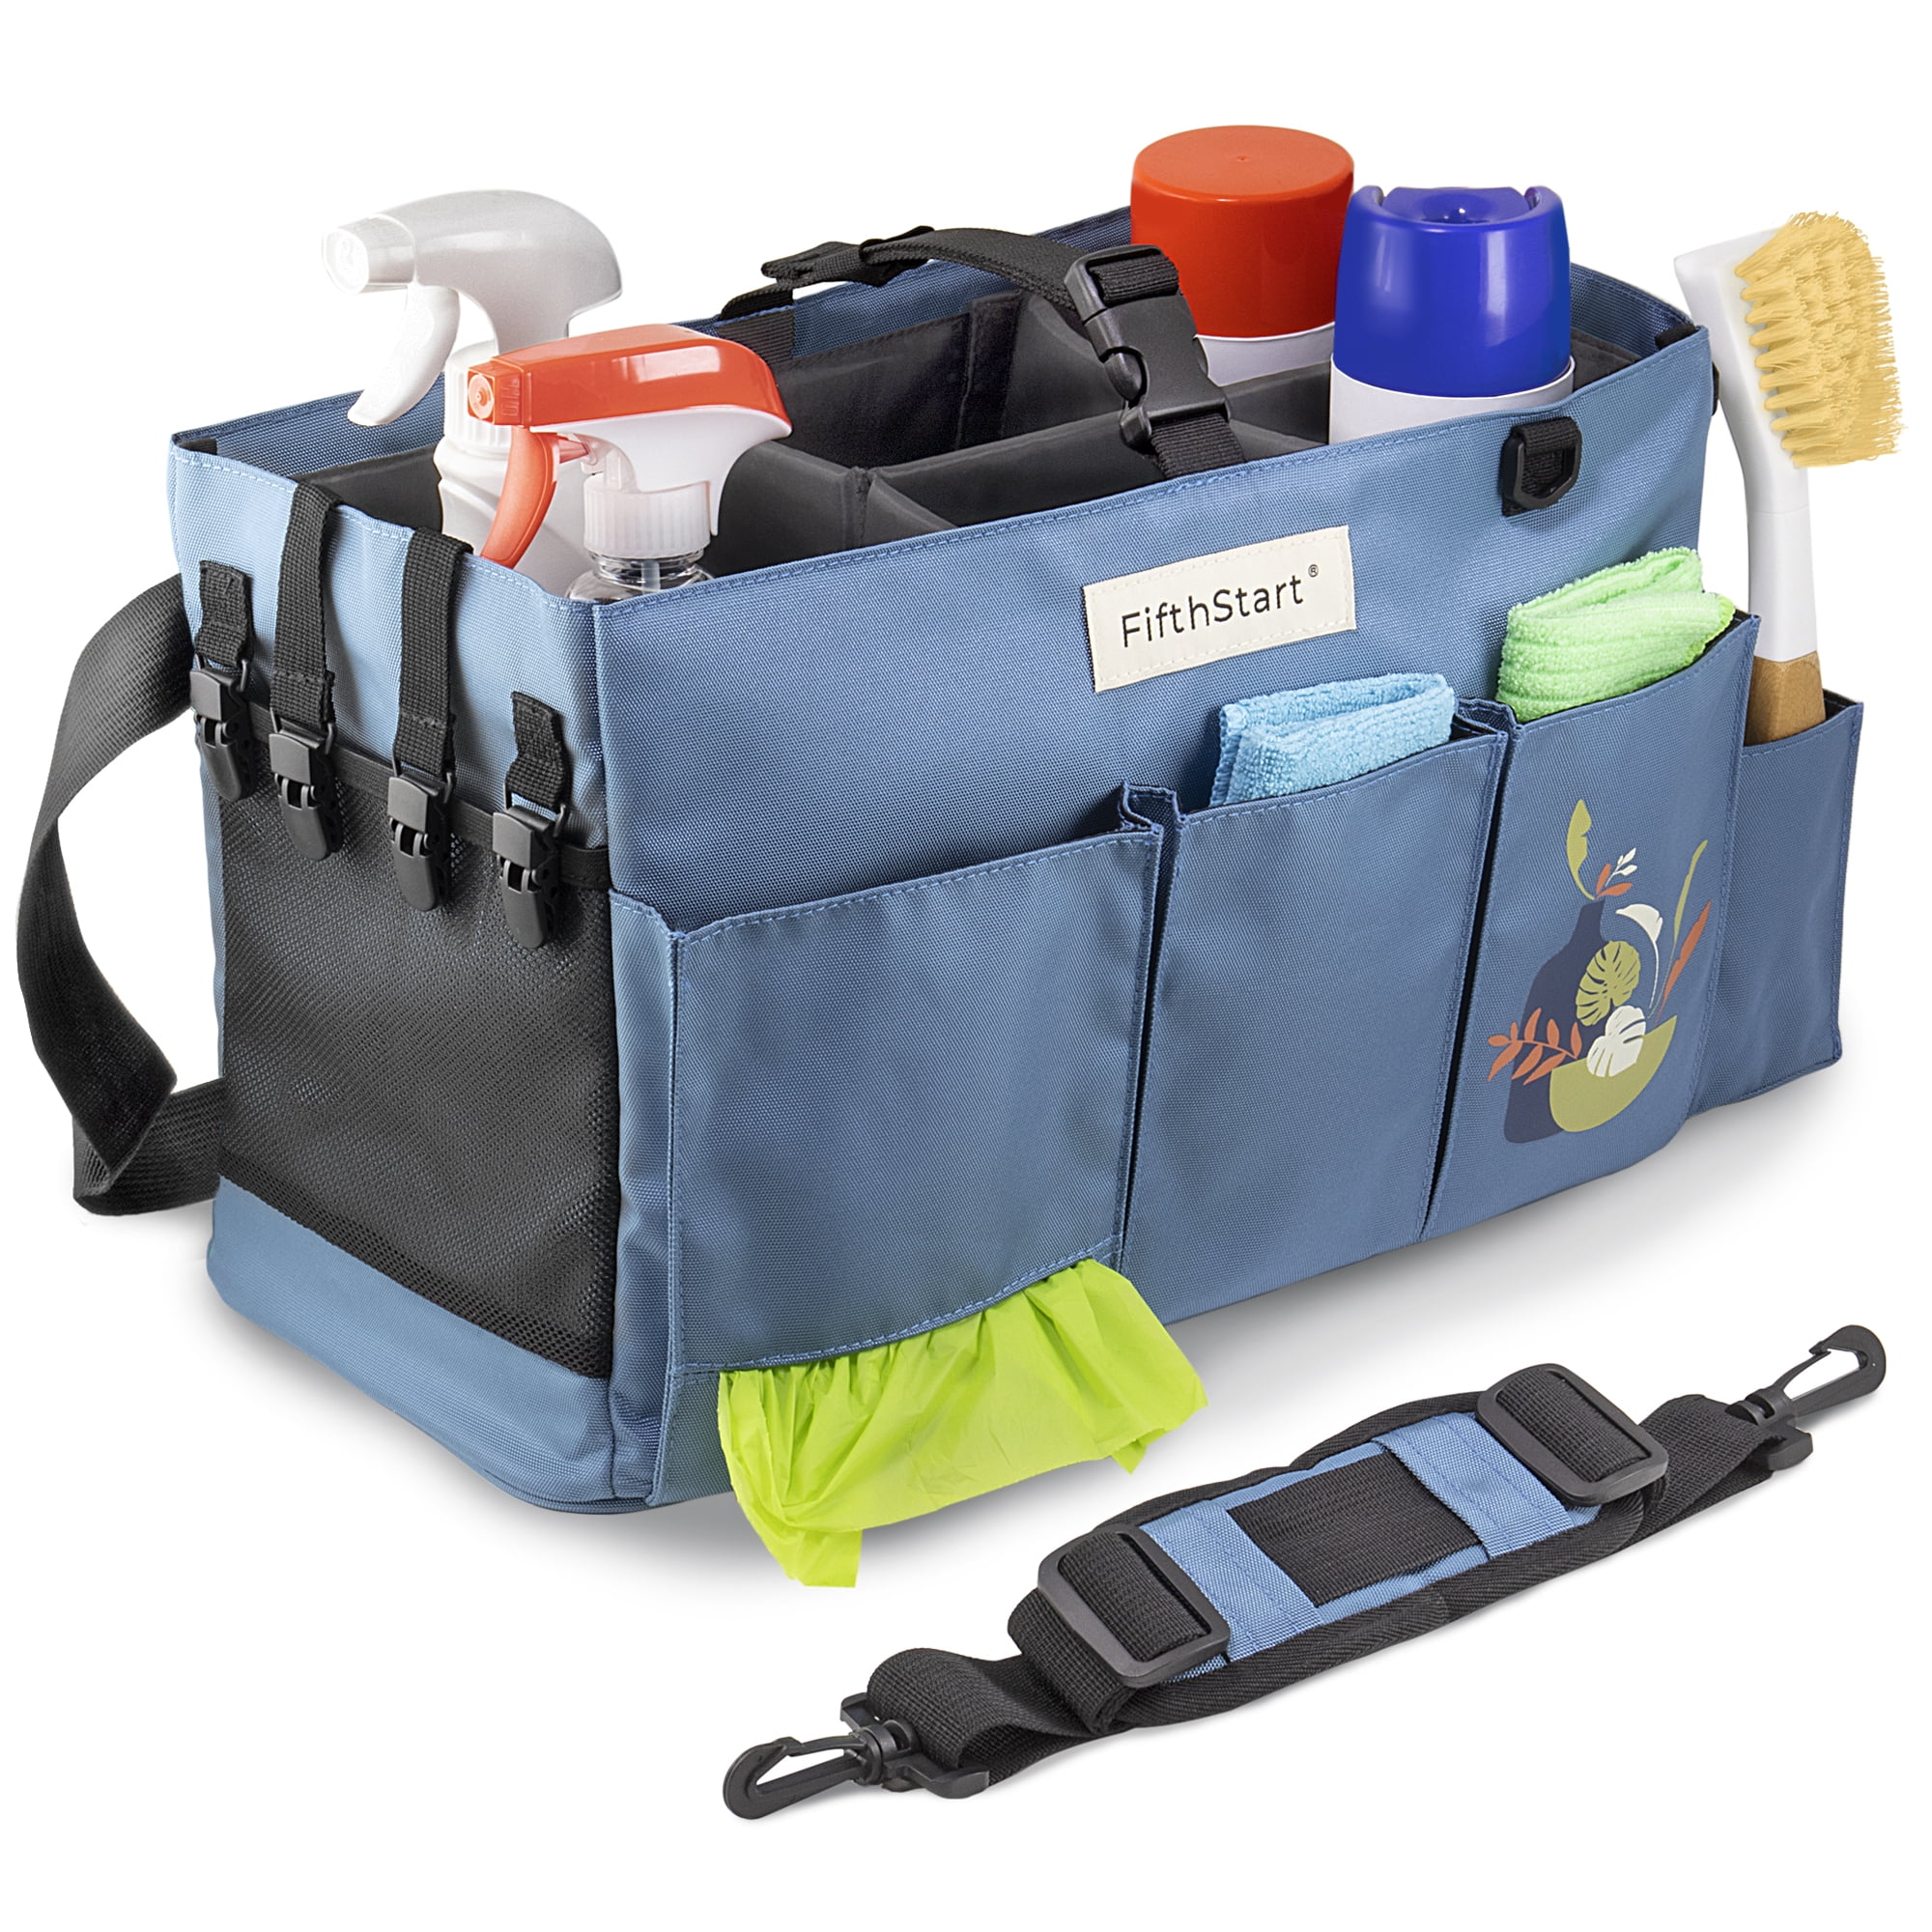 Guest Post: DIY Cleaners Caddy  Cleaning supplies, Storing cleaning  supplies, Car detailing